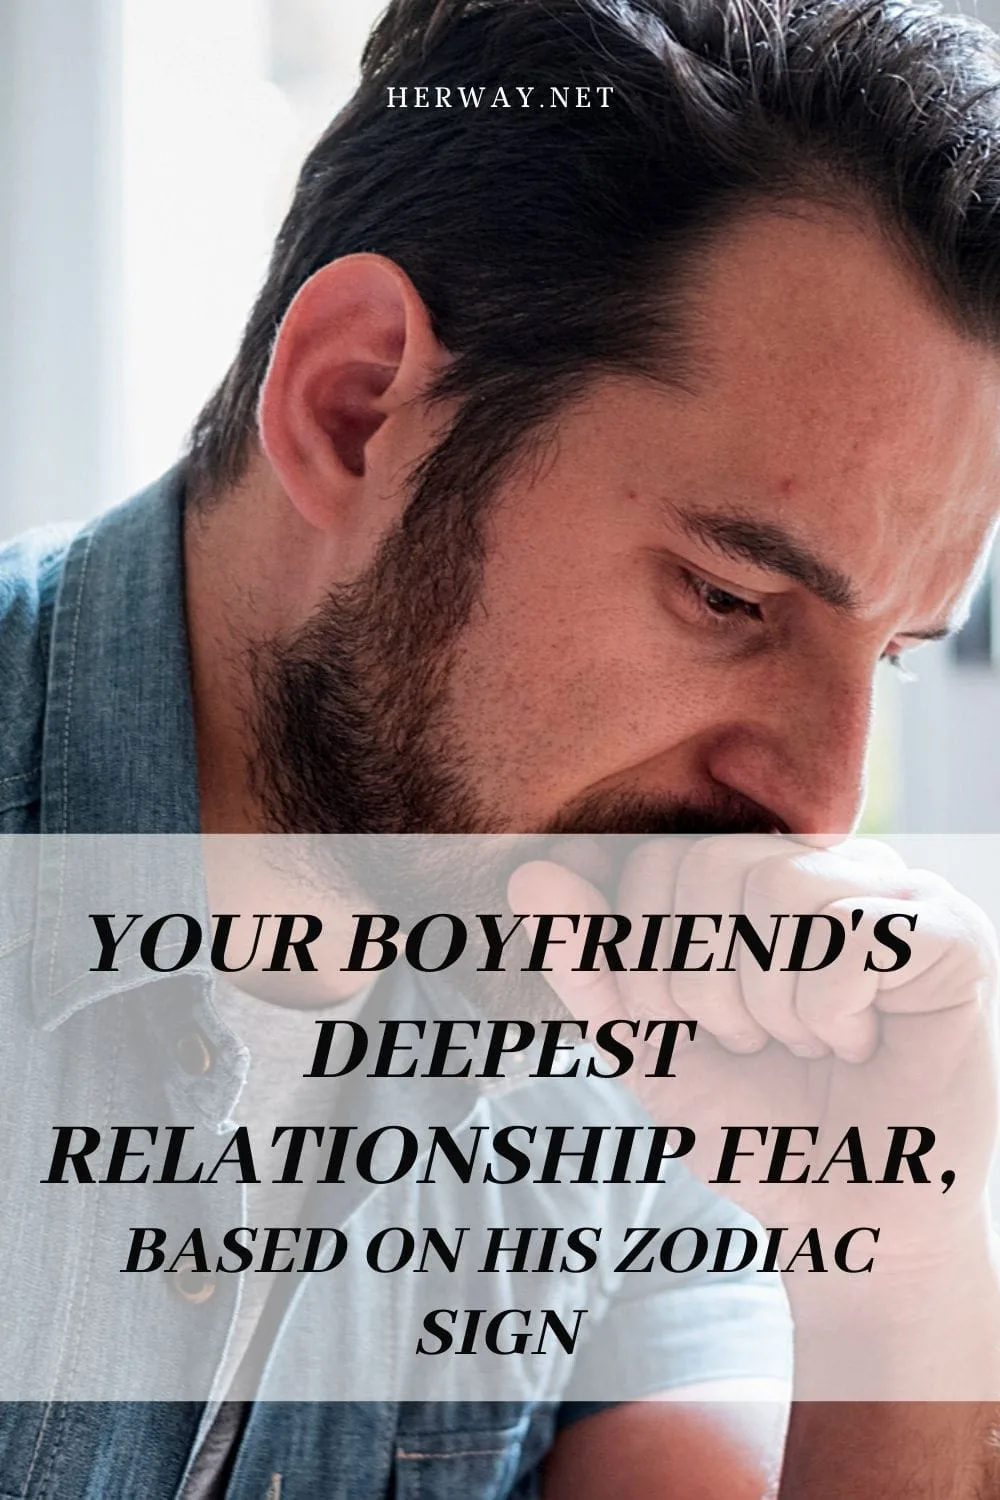 Your Boyfriend's Deepest Relationship Fear, Based On His Zodiac Sign